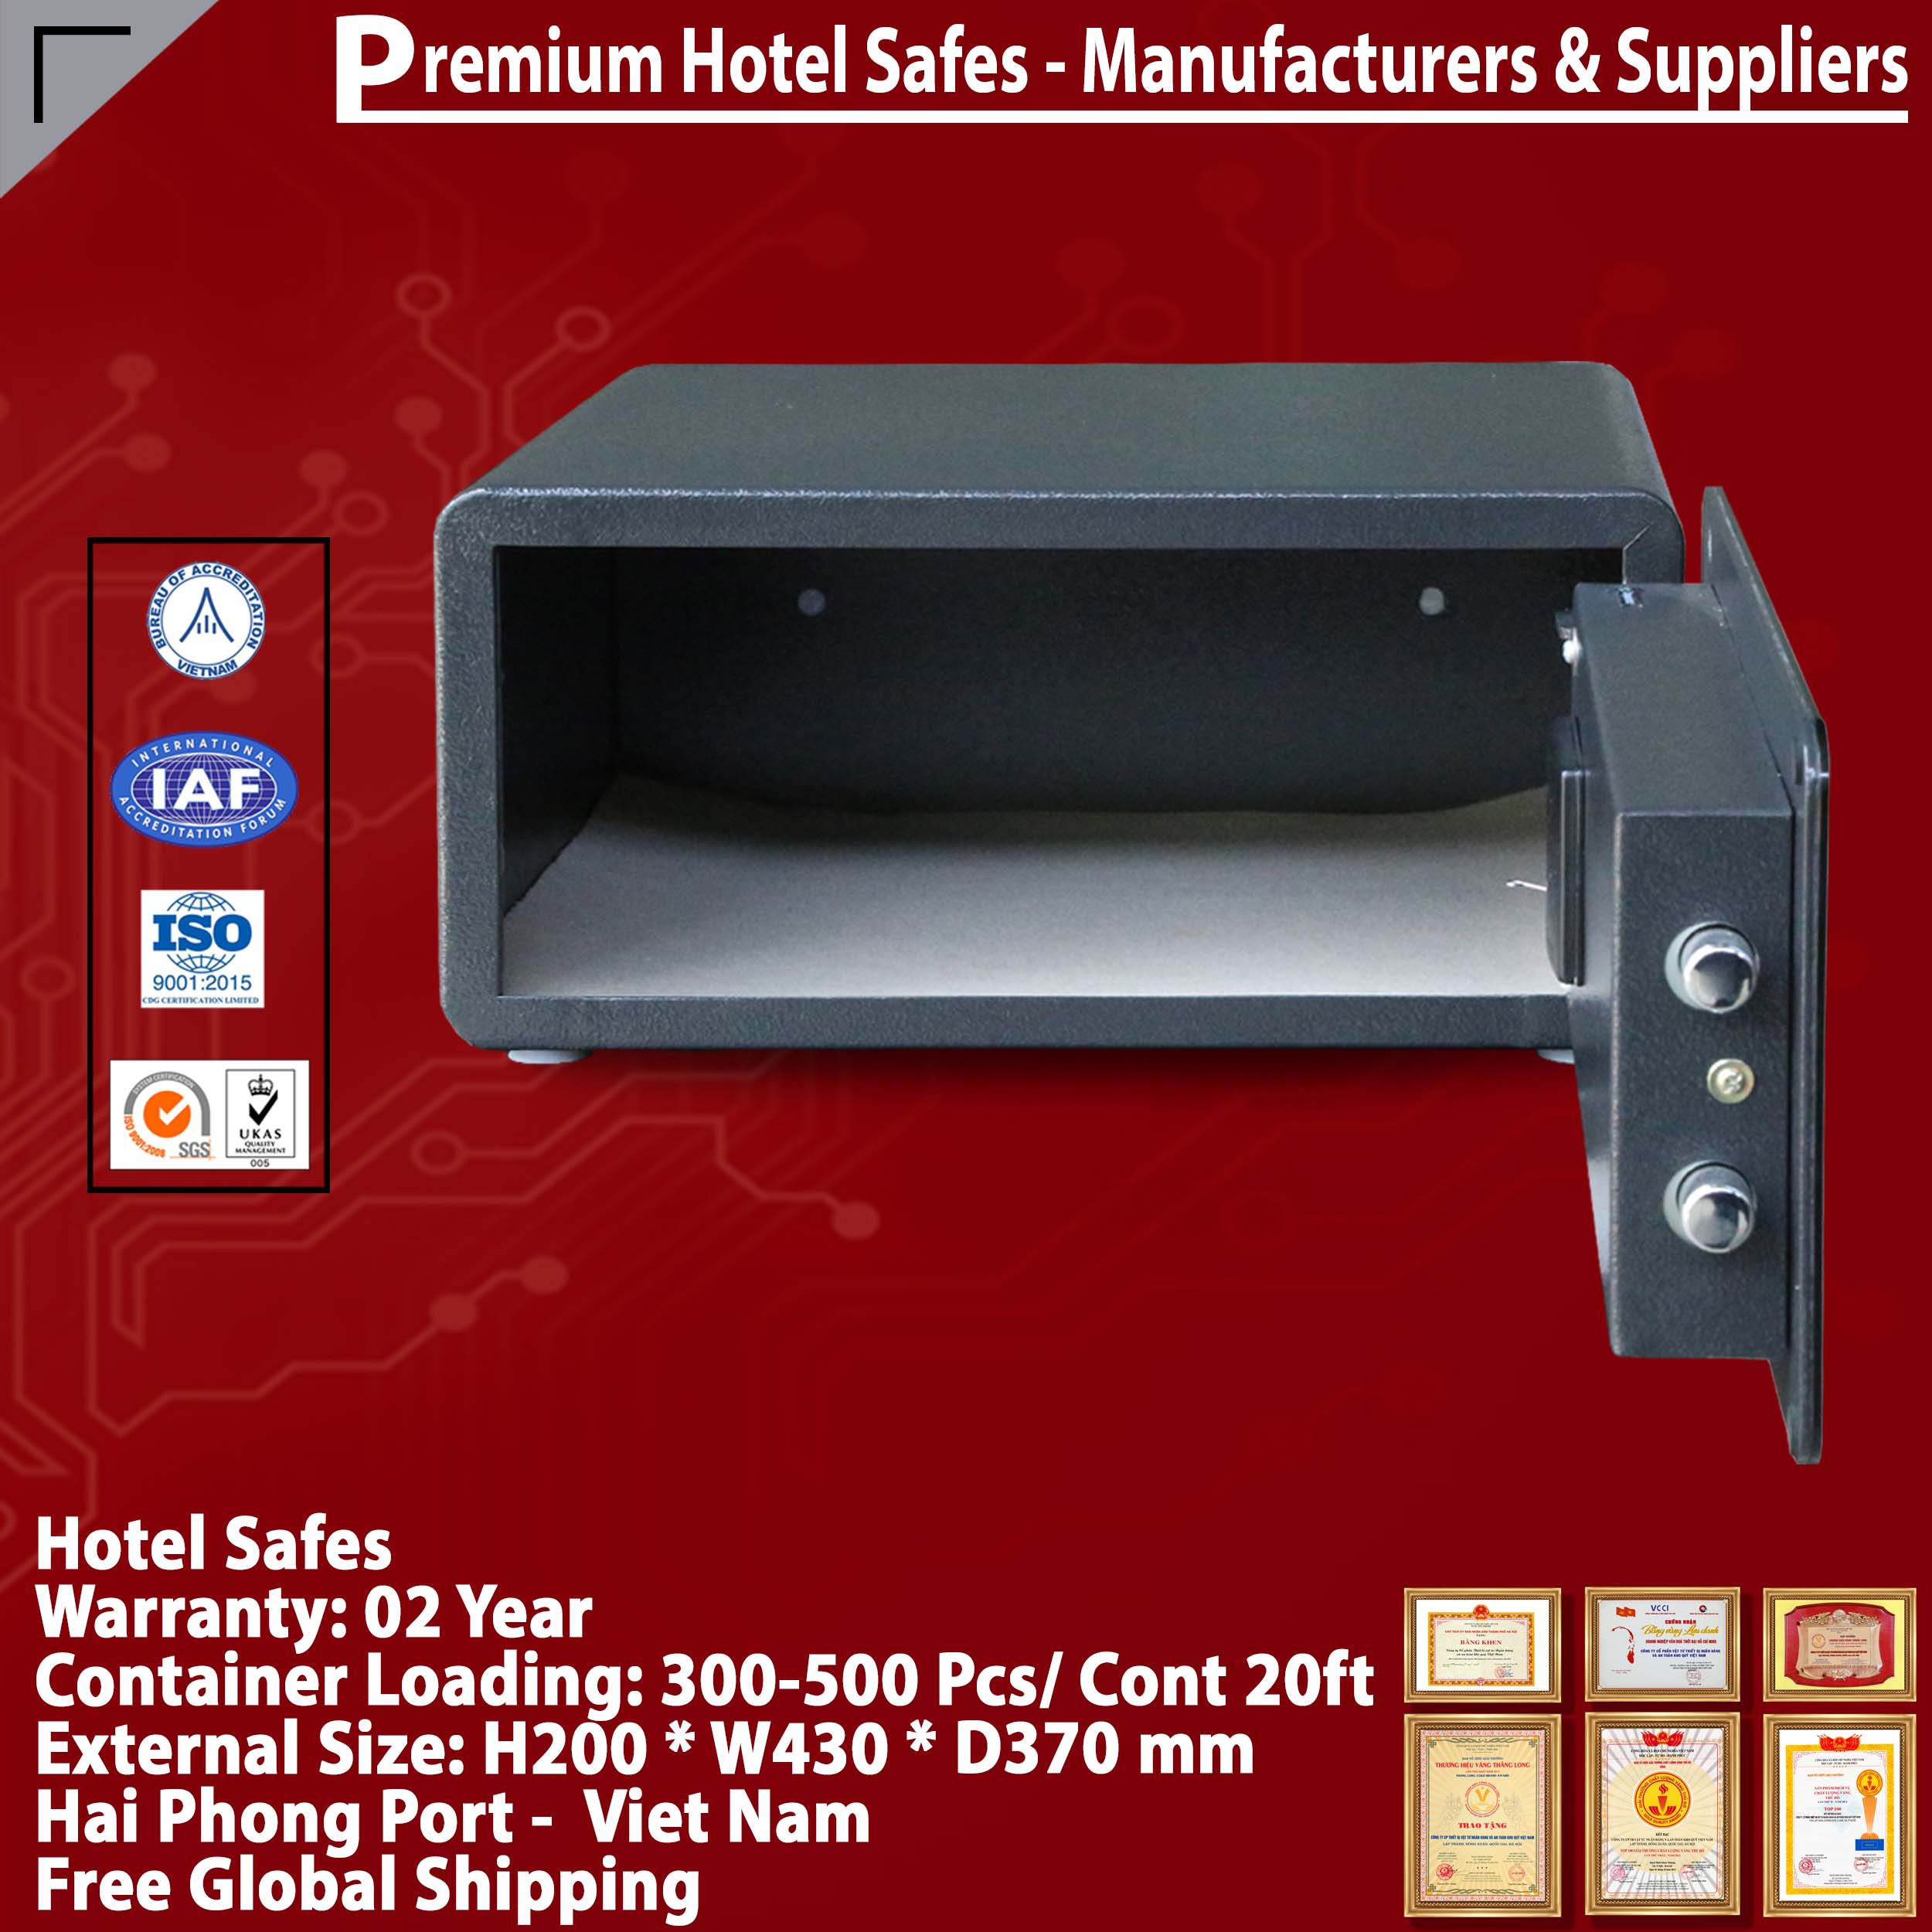 Portable Hotel Safes Made In Viet Nam